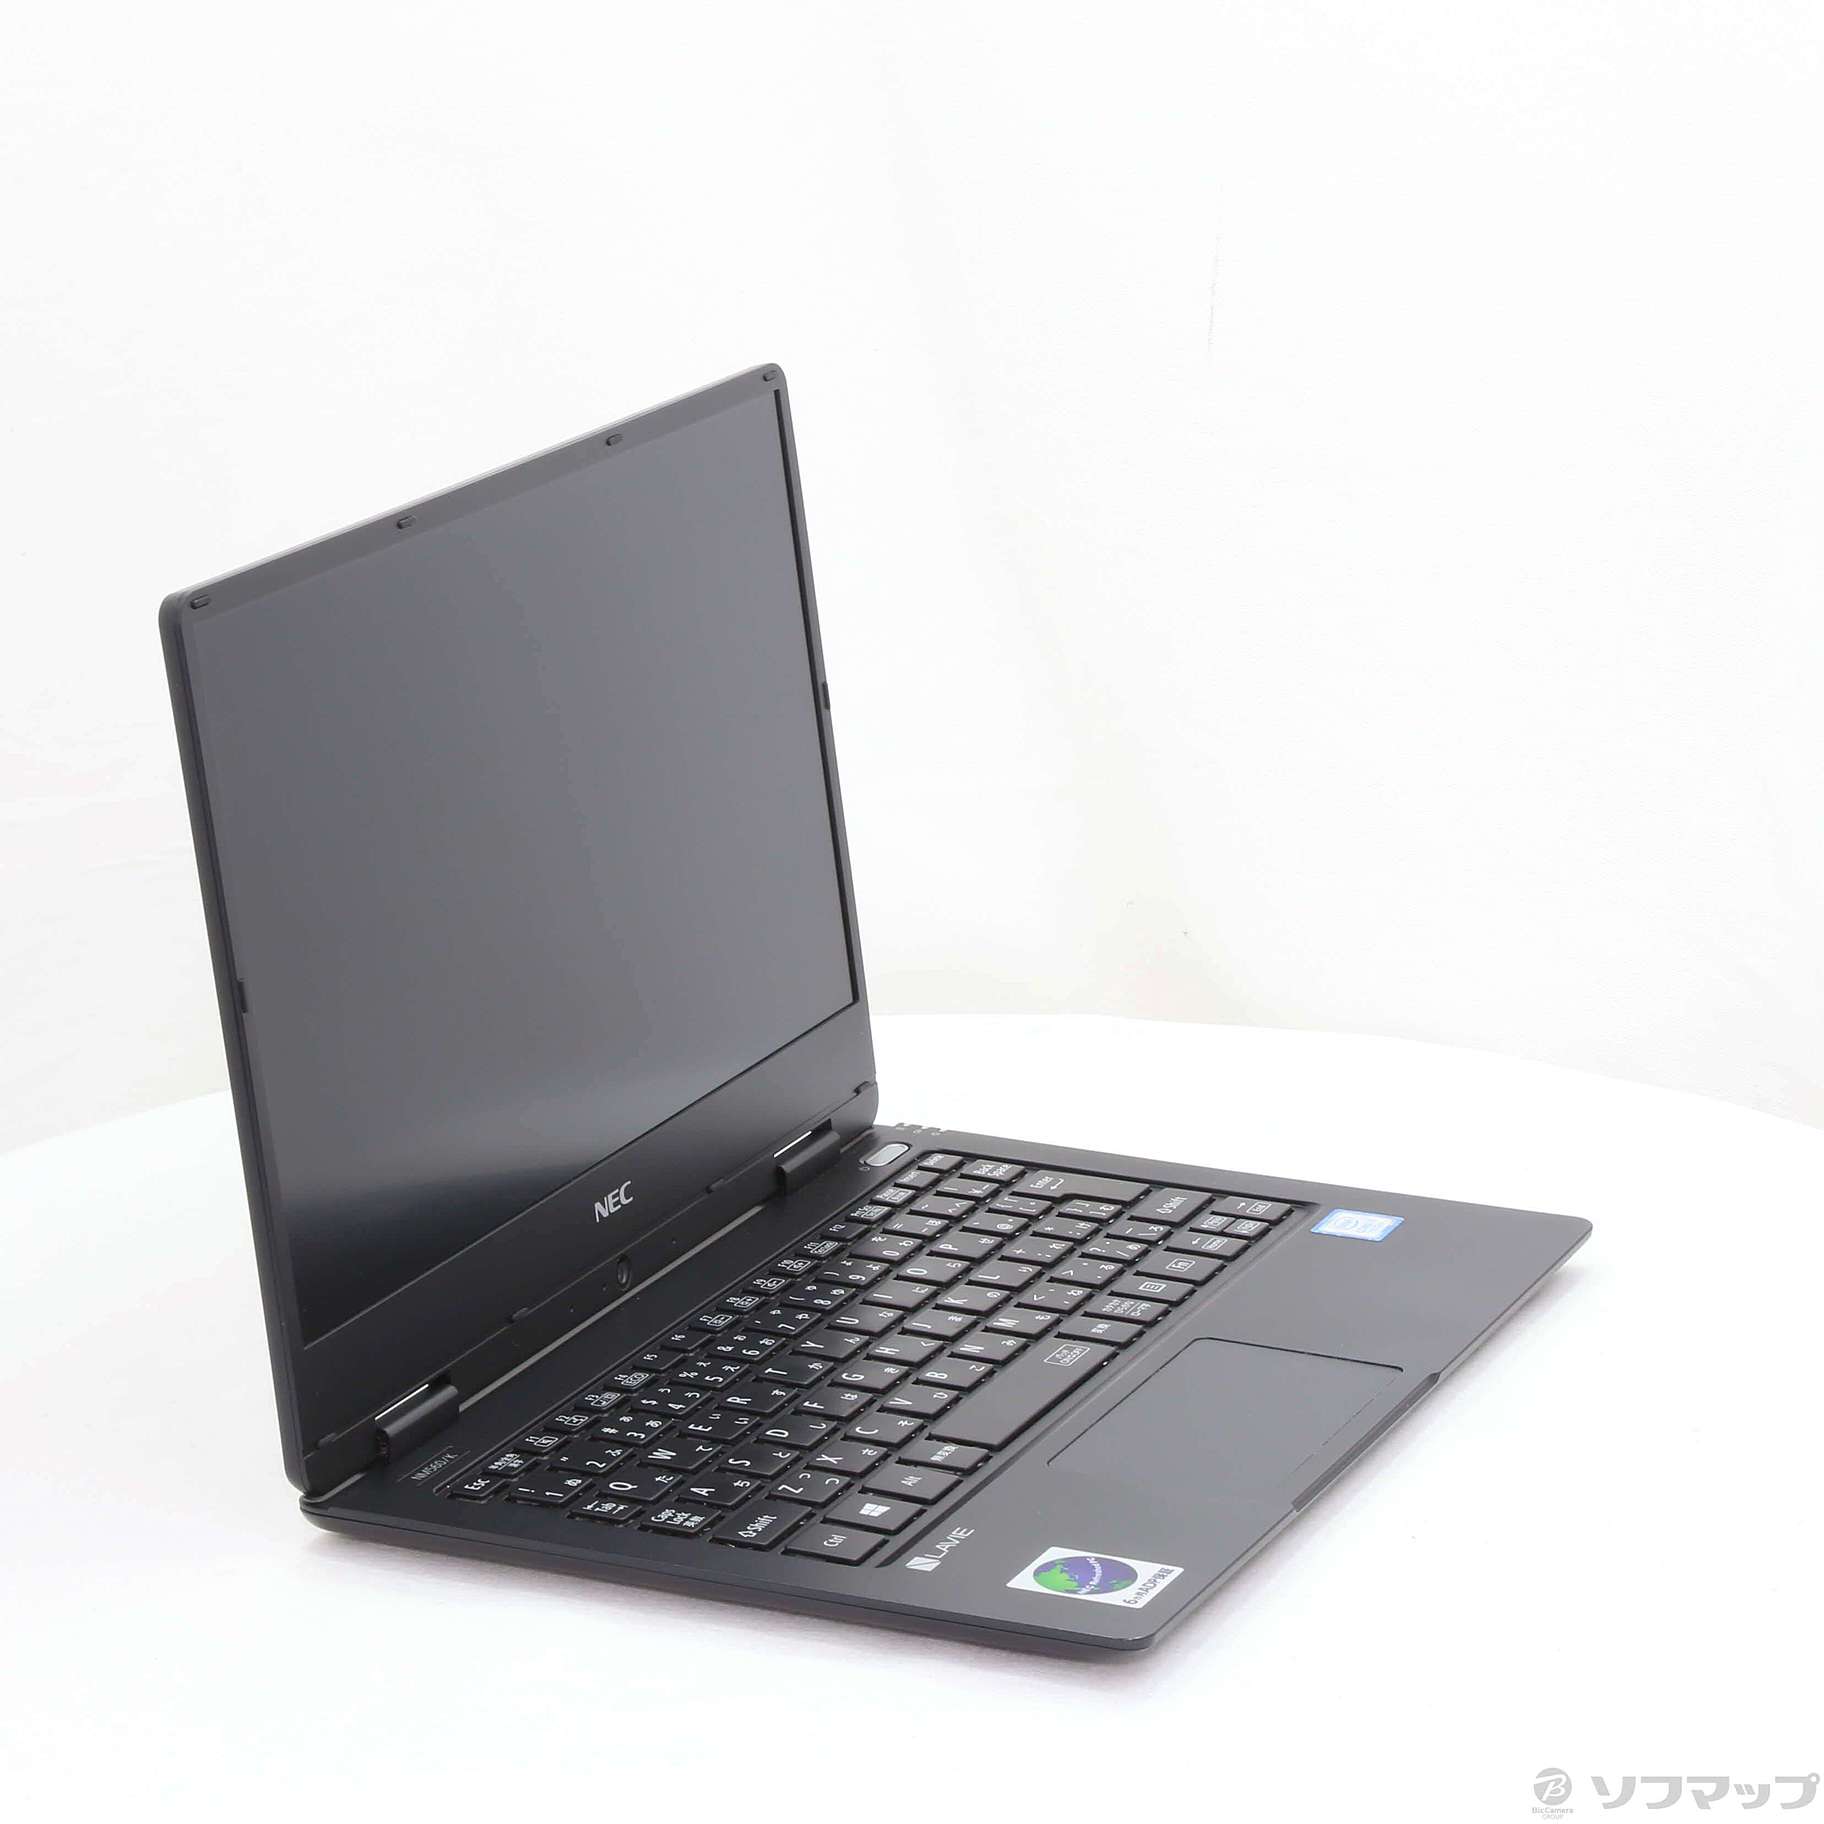 LaVie Note Mobile PC-NM560KAB-E1 パールブラック 〔NEC Refreshed PC〕 〔Windows 10〕  〔Office付〕 ≪メーカー保証あり≫